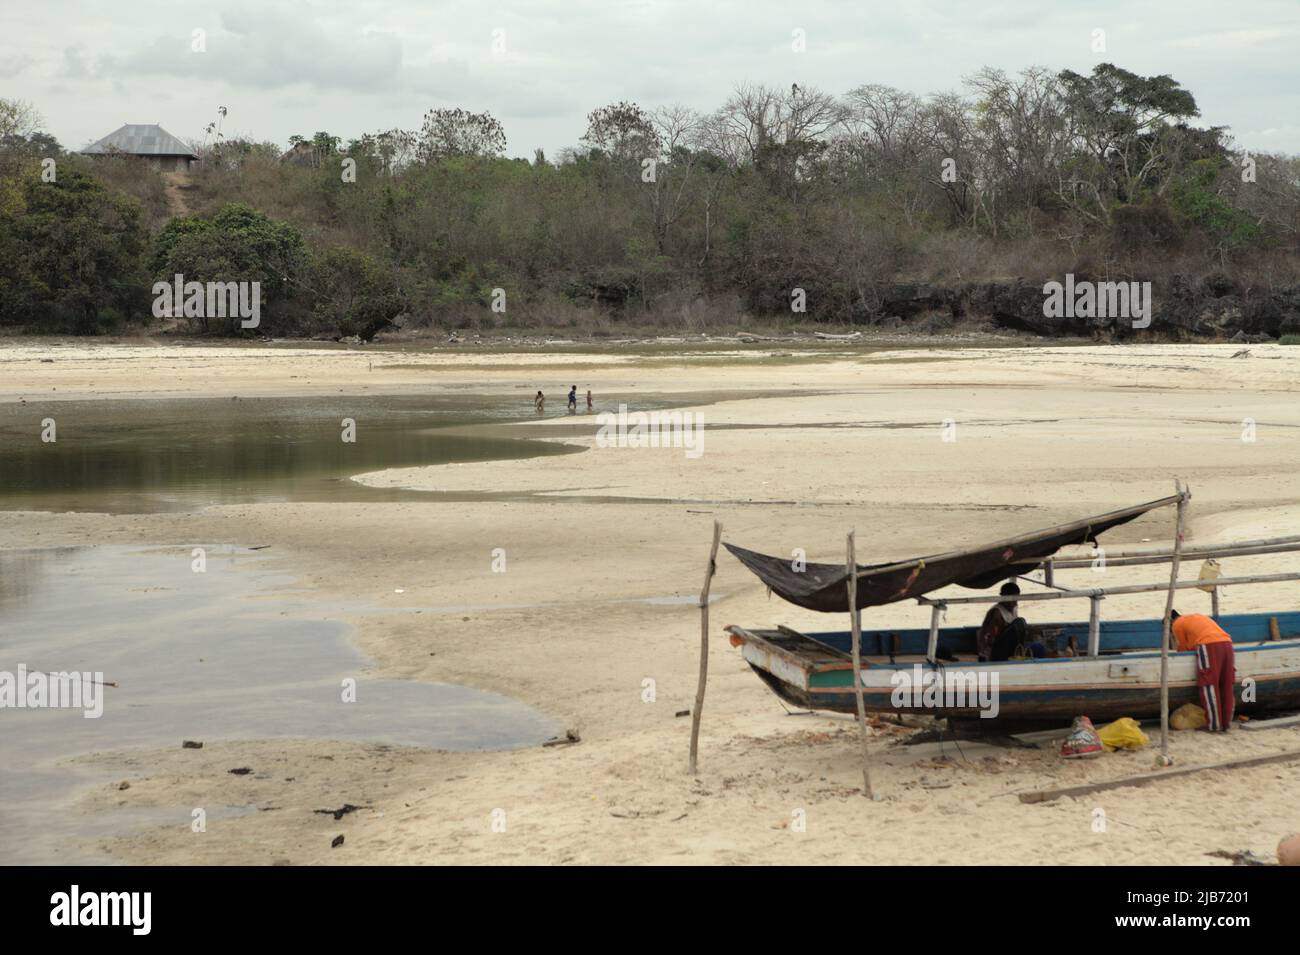 A fishing boat on intertidal beach during low tide on a cloudy day in Waikelo, Tambolaka, Southwest Sumba, East Nusa Tenggara, Indonesia. Stock Photo